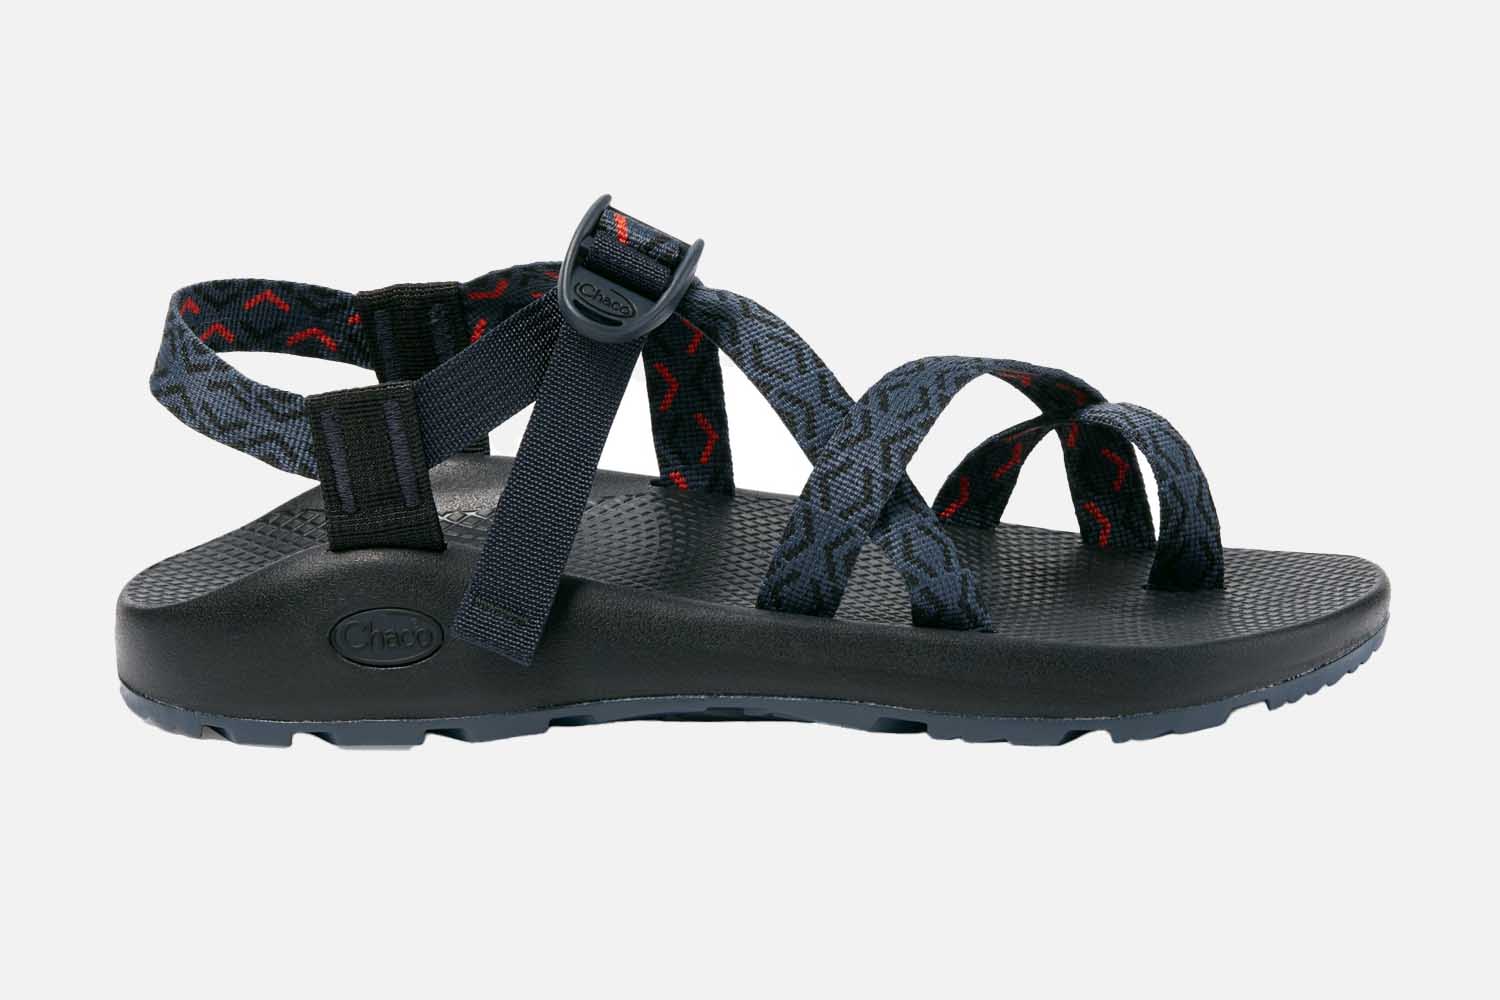 Chaco Z/2 Classic Sandals 